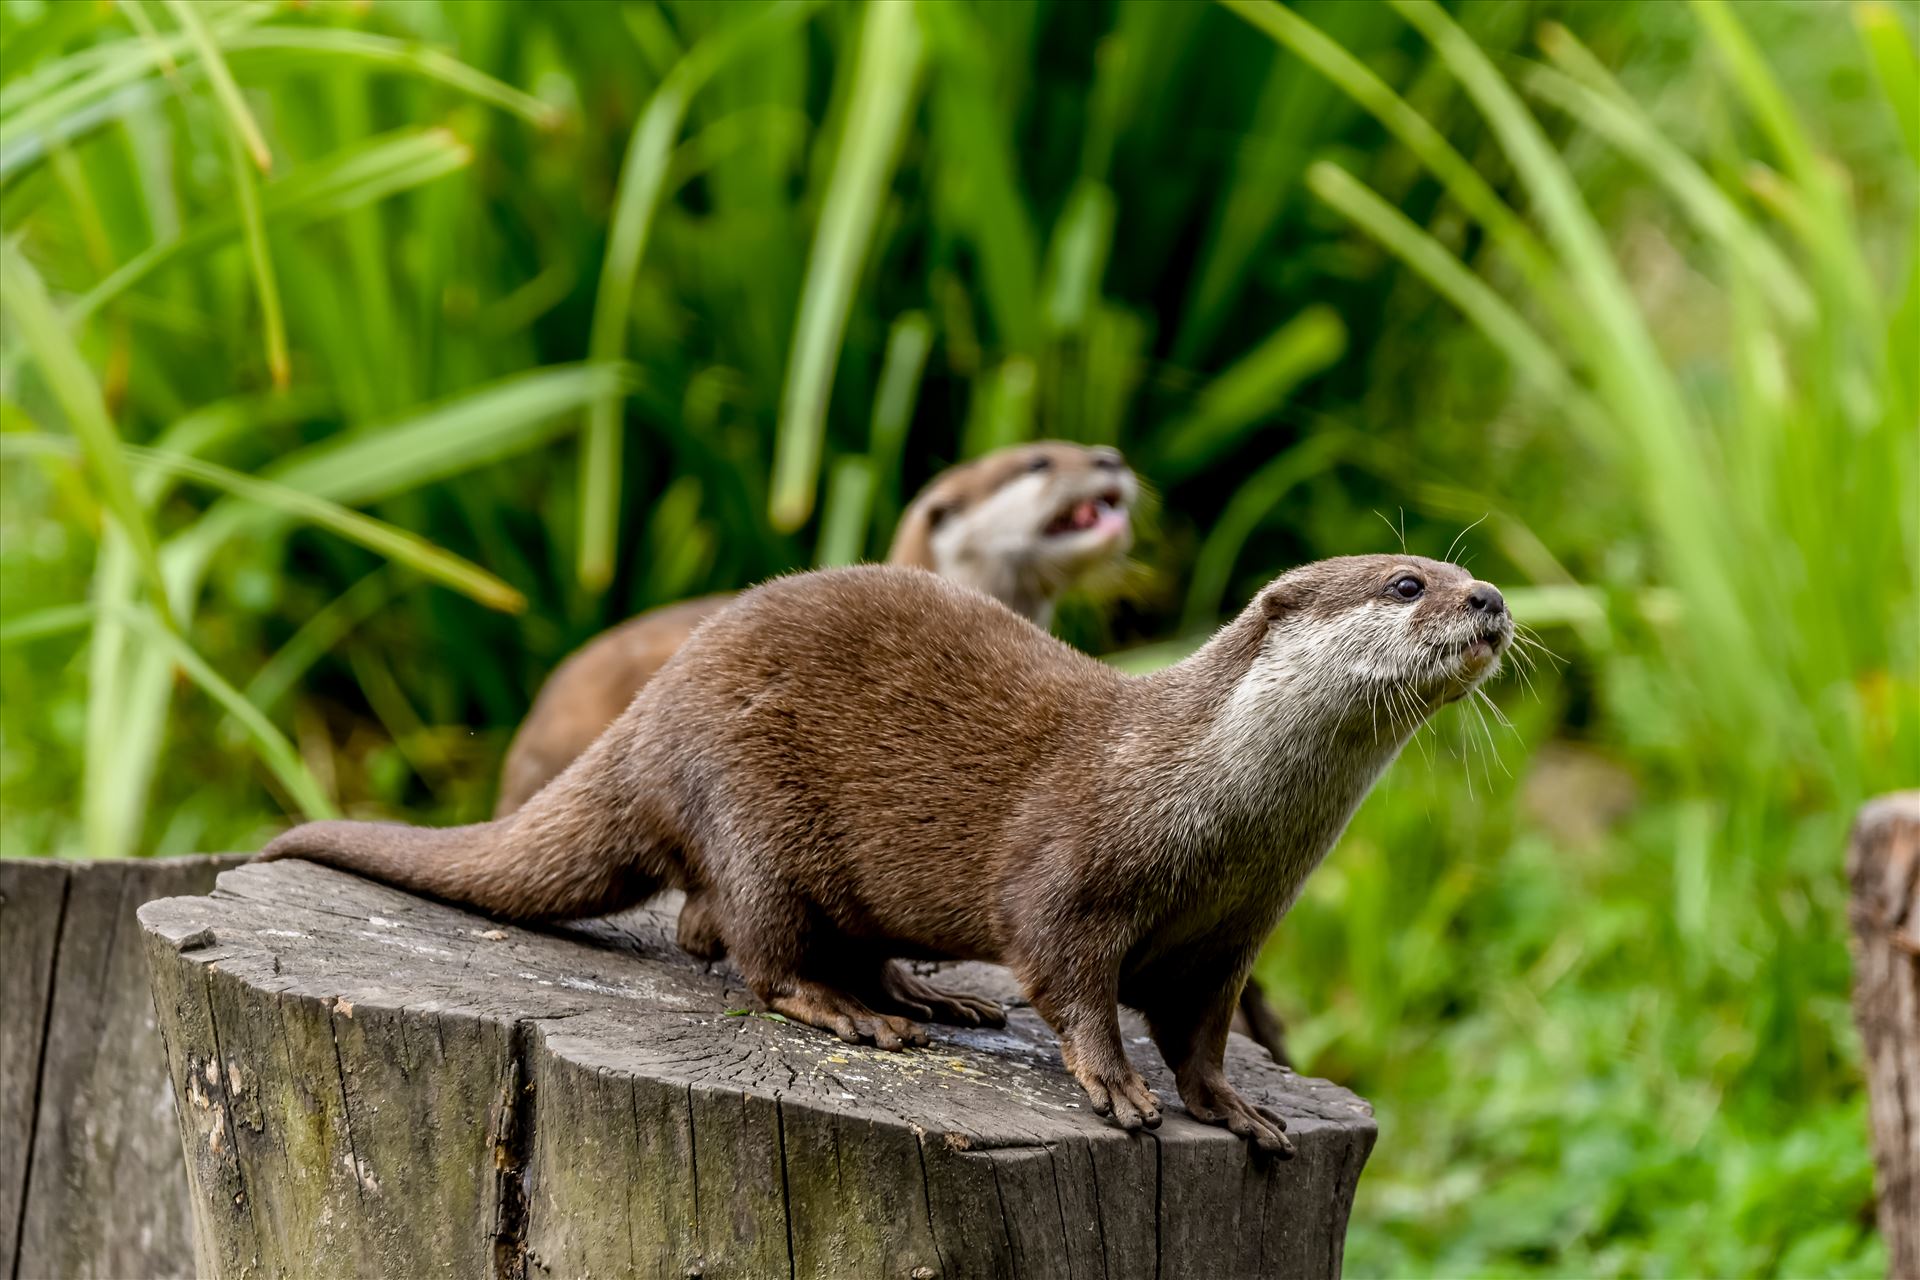 Asian short clawed otter Asian short clawed otters at Washington WWT by philreay